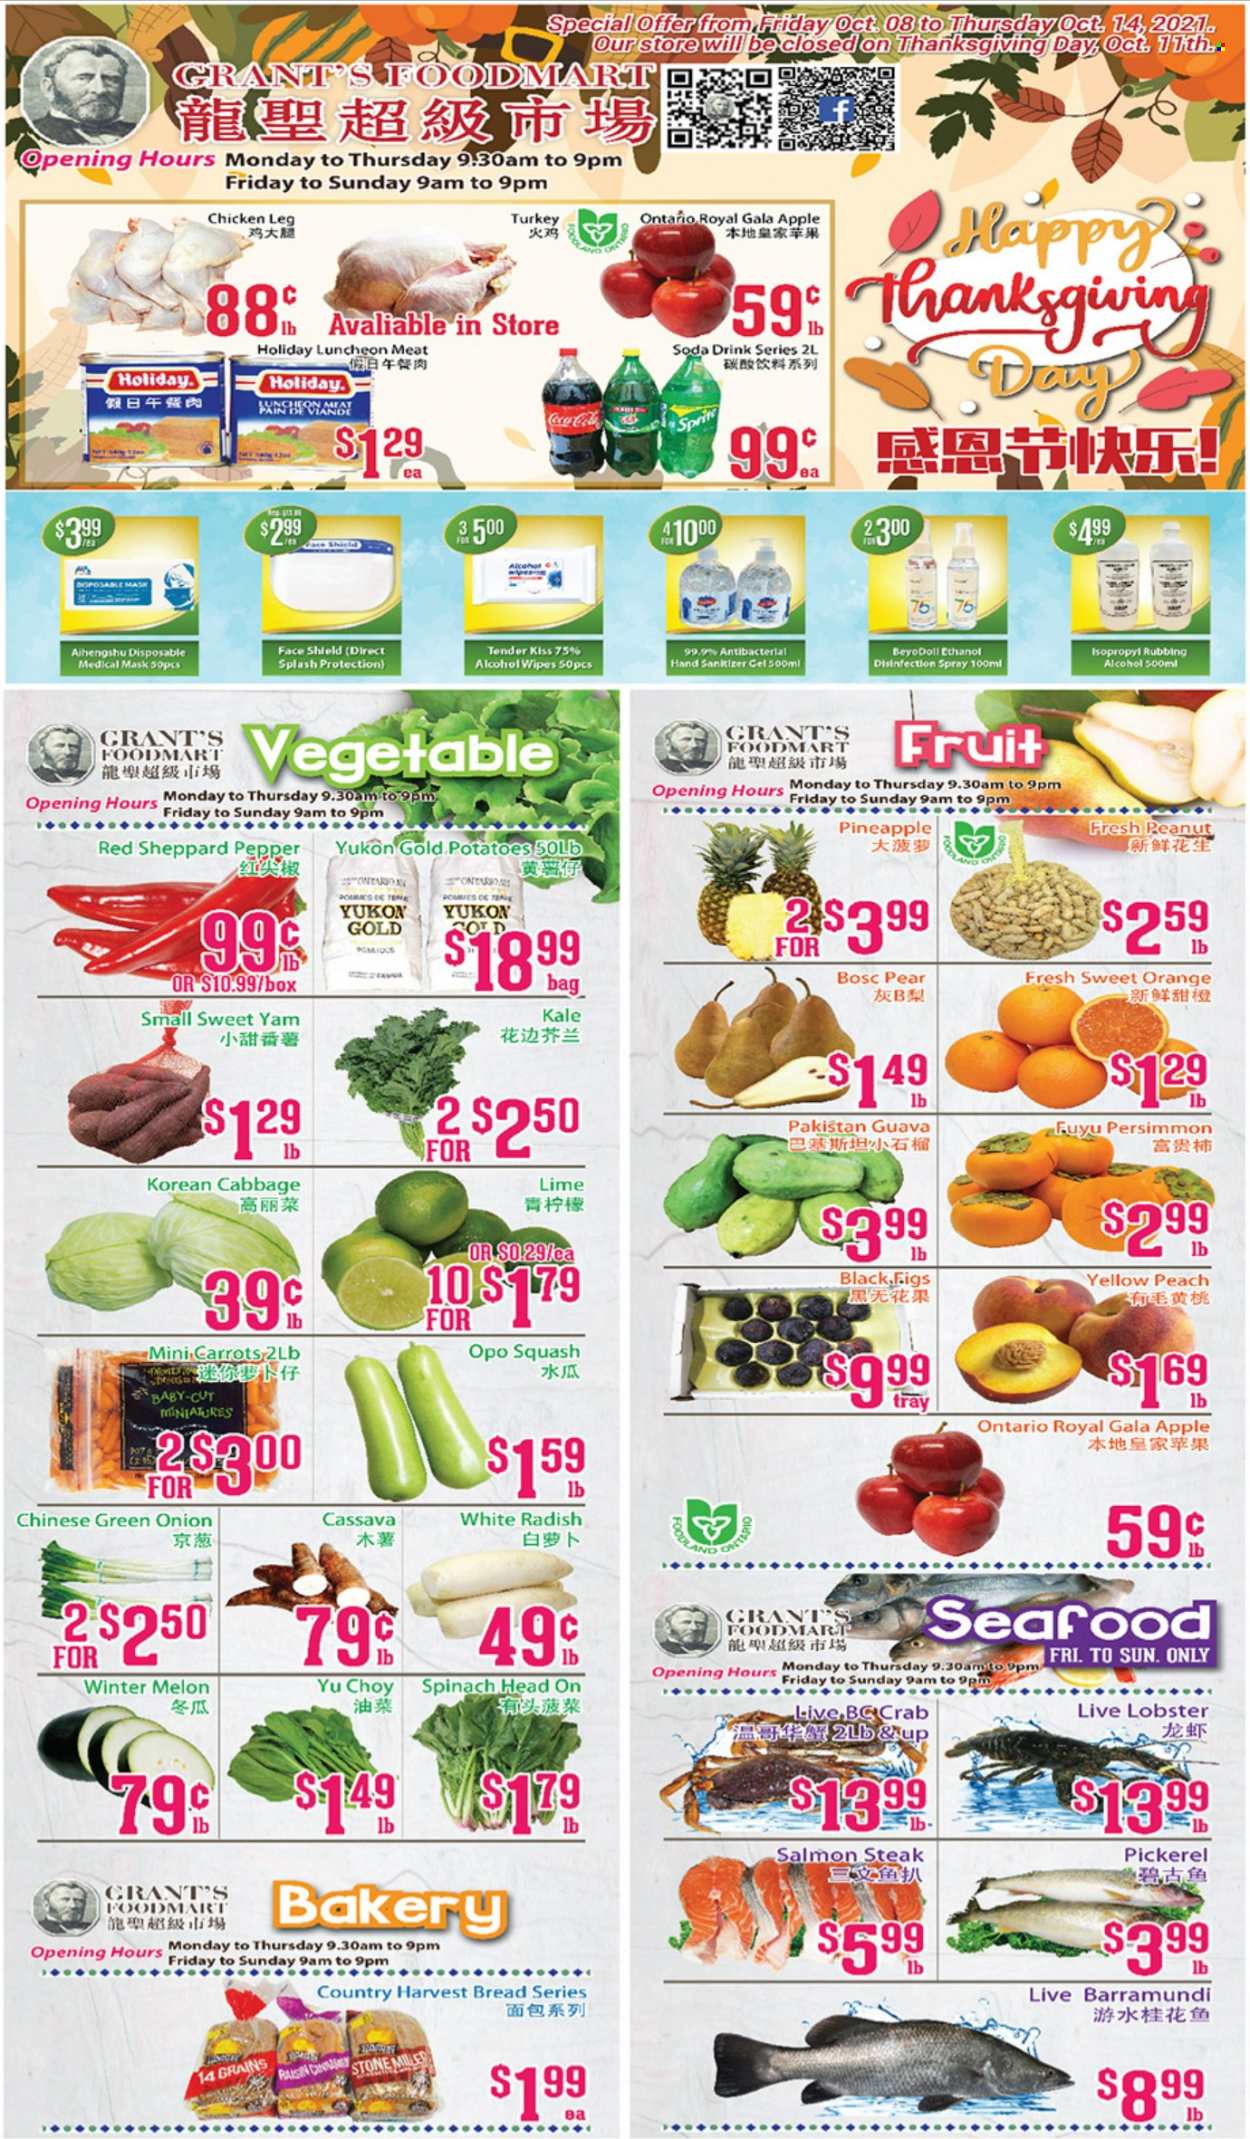 thumbnail - Grant's Foodmart Flyer - October 08, 2021 - October 14, 2021 - Sales products - bread, cabbage, carrots, radishes, spinach, kale, potatoes, onion, white radish, green onion, cassava, figs, Gala, guava, pineapple, pears, persimmons, melons, barramundi, lobster, salmon, walleye, lunch meat, Country Harvest, Fita, Coca-Cola, soda, Grant's, chicken legs, wipes, hand sanitizer, steak, oranges. Page 1.